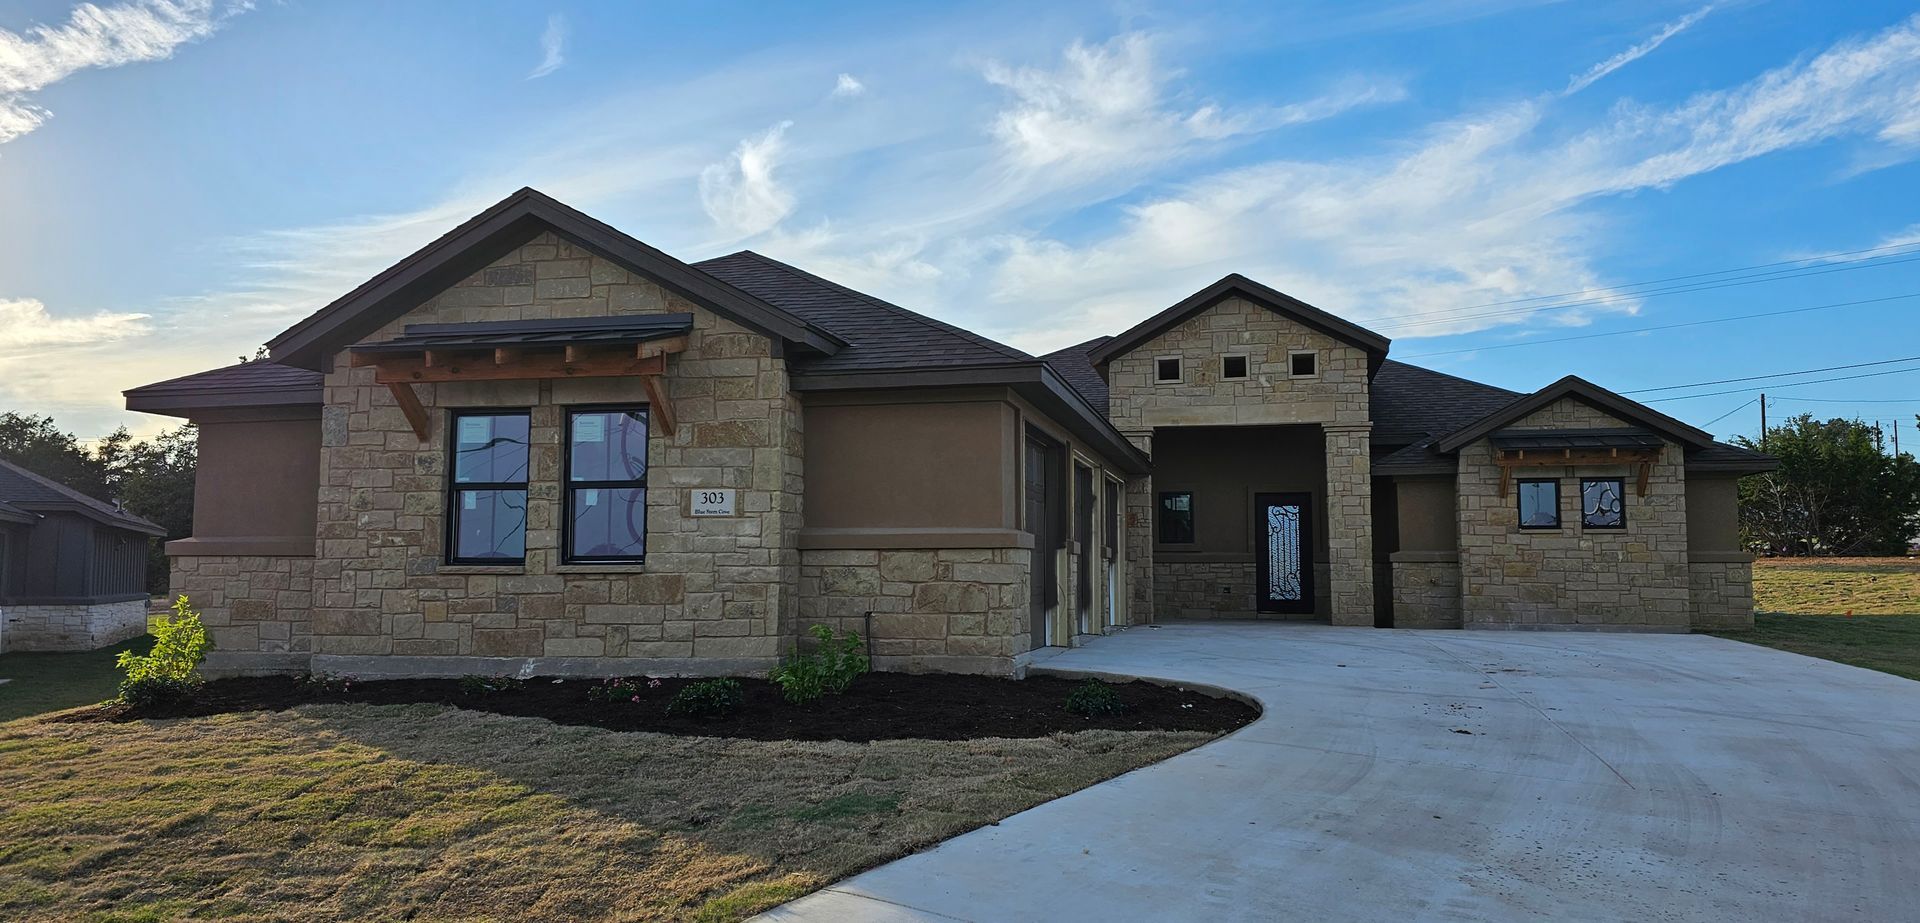 lost quarry available homes | Vale Irvin Homes | Florence, TX 76527